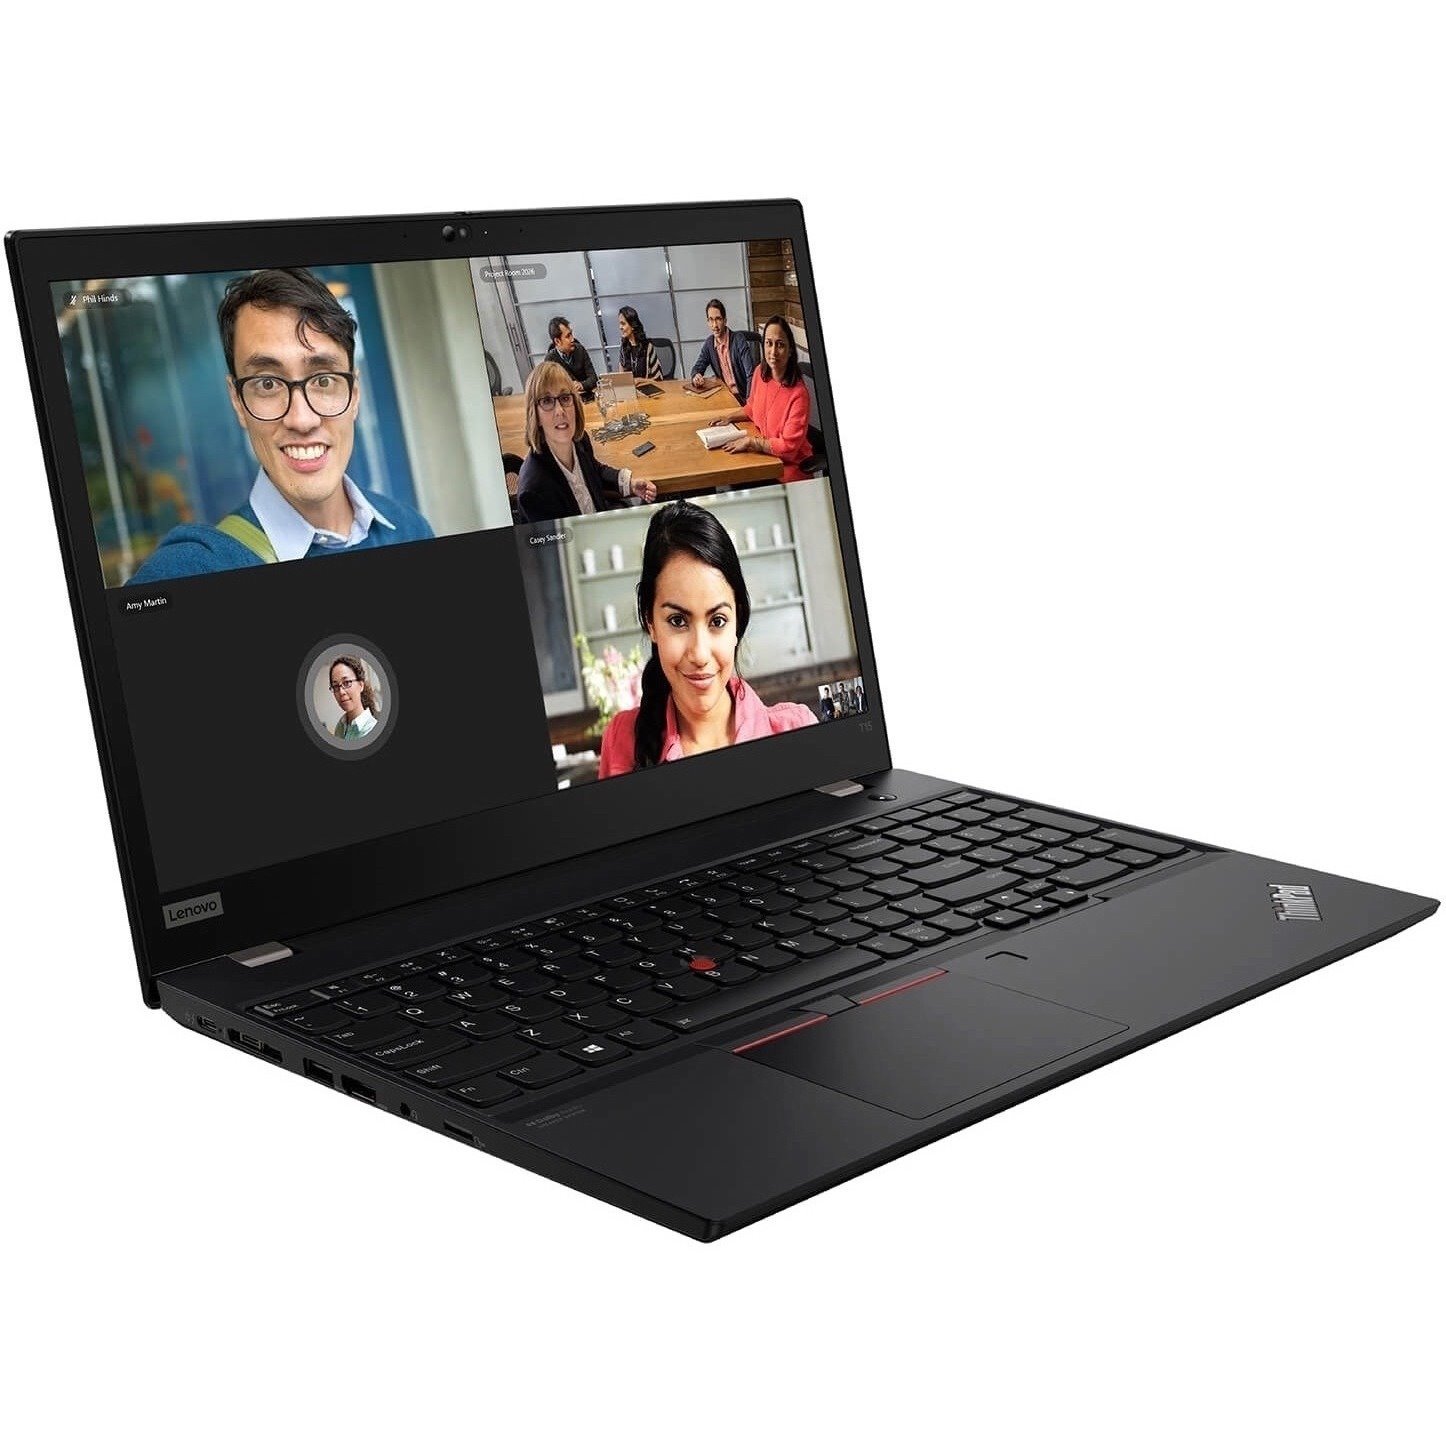 Lenovo ThinkPad T15 Gen 2 20W400K5CA 15.6" Notebook - Full HD - 1920 x 1080 - Intel Core i5 11th Gen i5-1135G7 Quad-core (4 Core) 2.4GHz - 16GB Total RAM - 512GB SSD - Black - no ethernet port - not compatible with mechanical docking stations